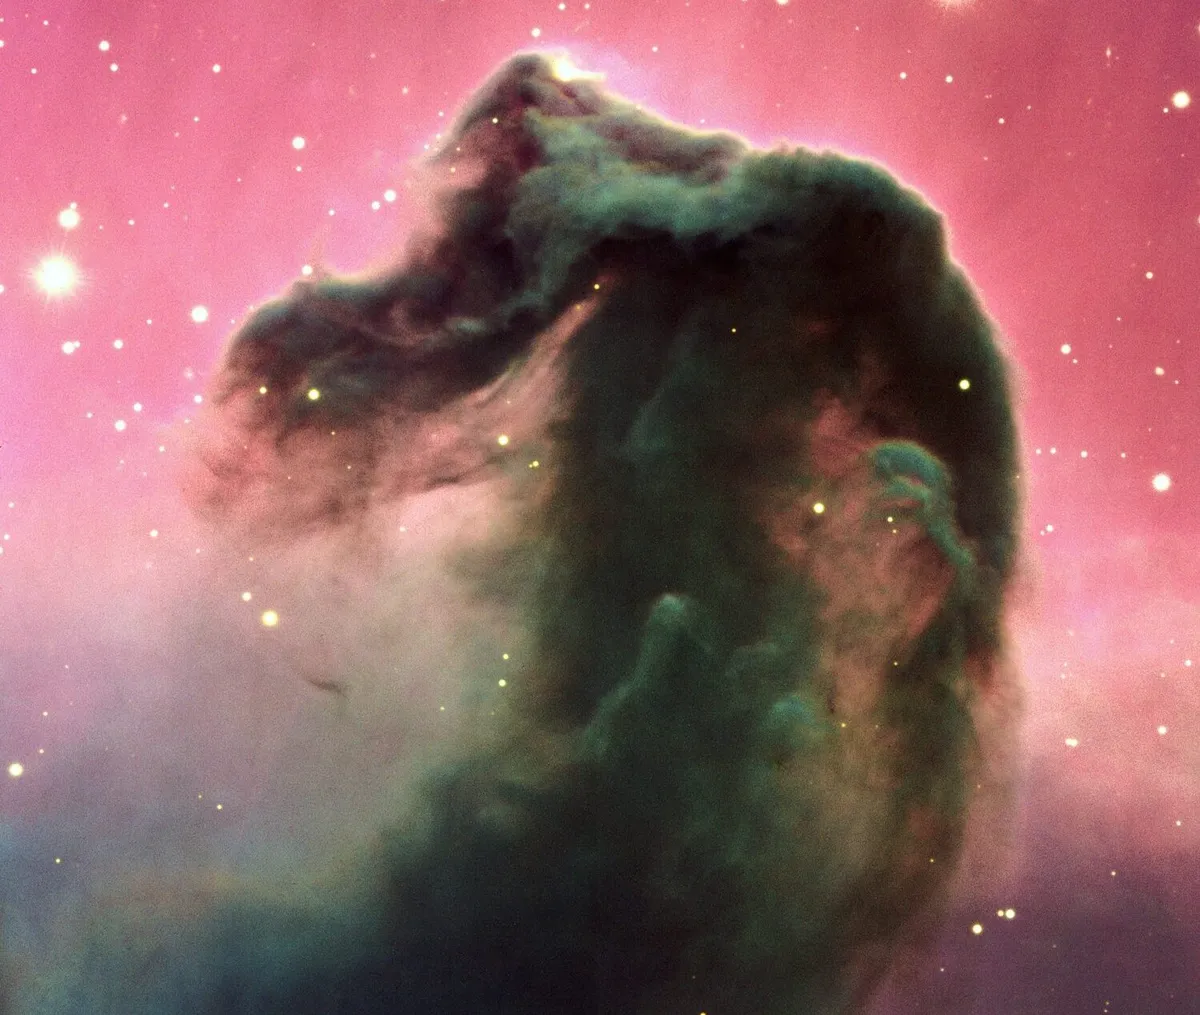 Against the red glow of the Orion Molecular cloud is a dark curl of dust that forms the unmistakable shape of a horse’s head. The larger cloud is a giant stellar nursery, and it’s thought the Horsehead Nebula has enough mass to create 30 Sun-like stars. Credit: ESO